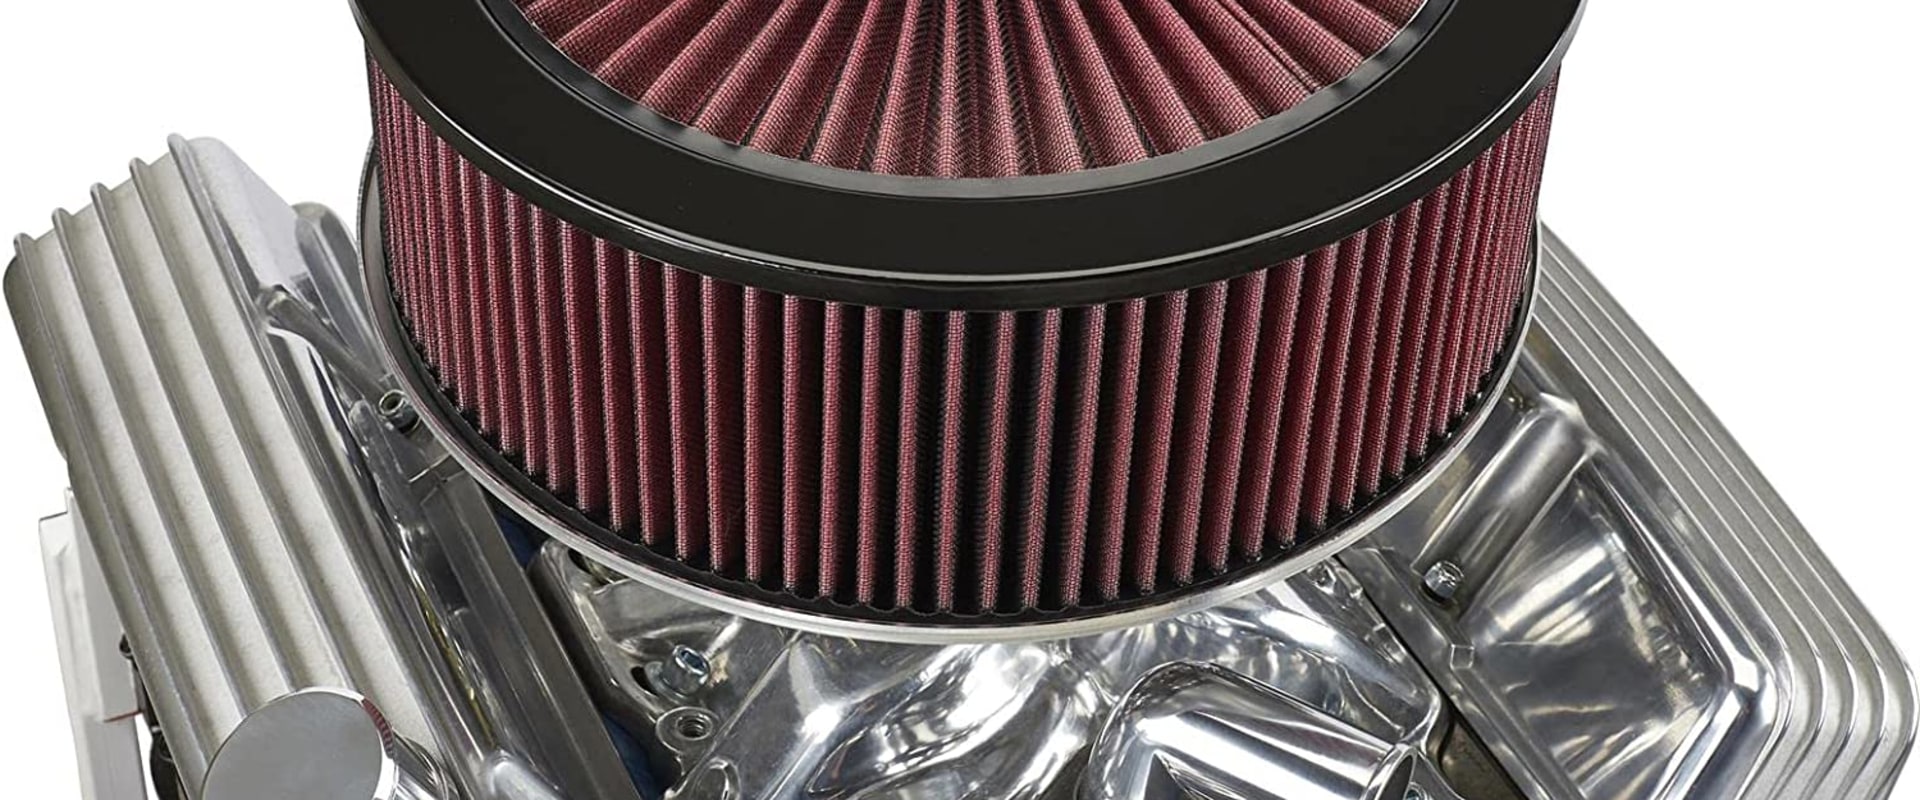 Which Brand Air Filter is Best for Your Oven?